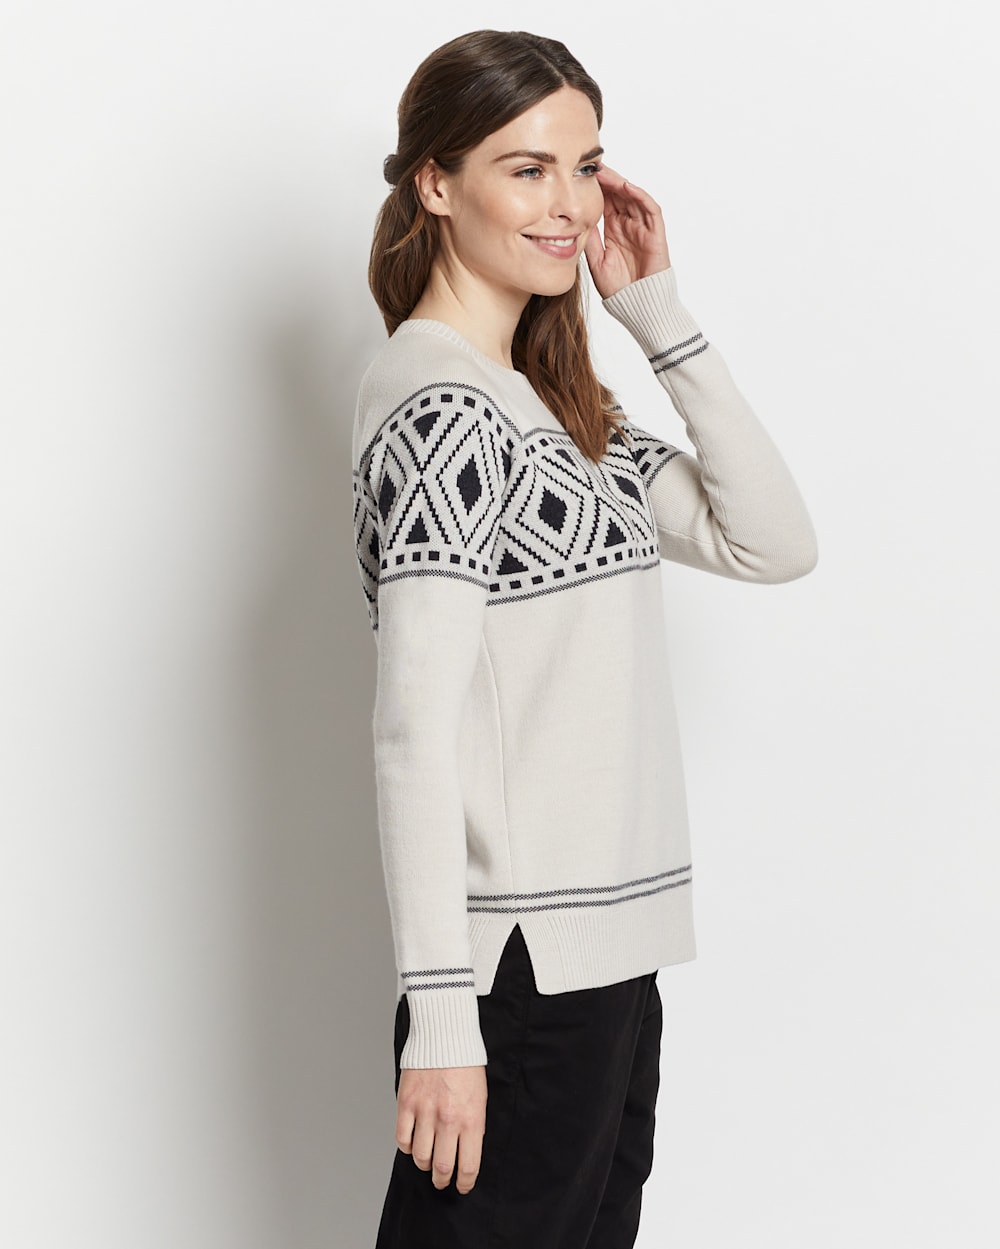 ALTERNATE VIEW OF WOMEN'S GRAPHIC MERINO CREWNECK SWEATER IN IVORY/CHARCOAL image number 3